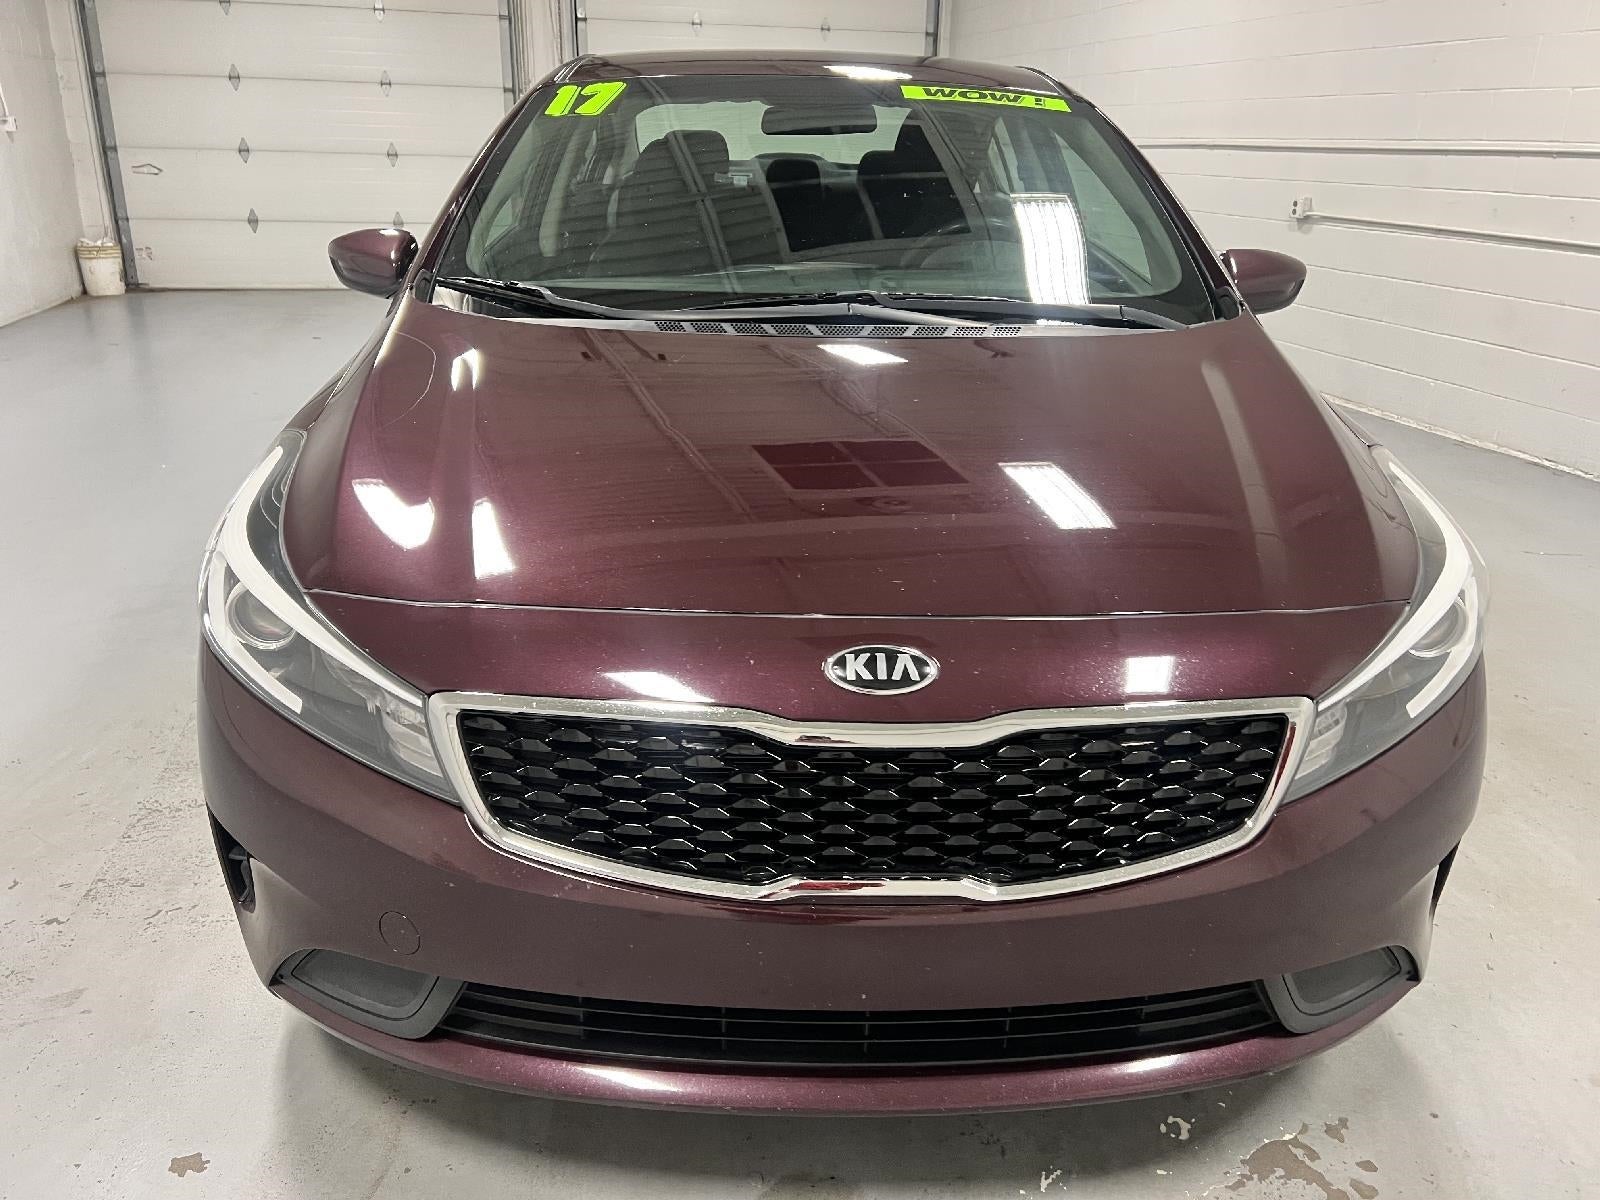 Used 2017 Kia Forte LX with VIN 3KPFK4A76HE148762 for sale in Manhattan, KS